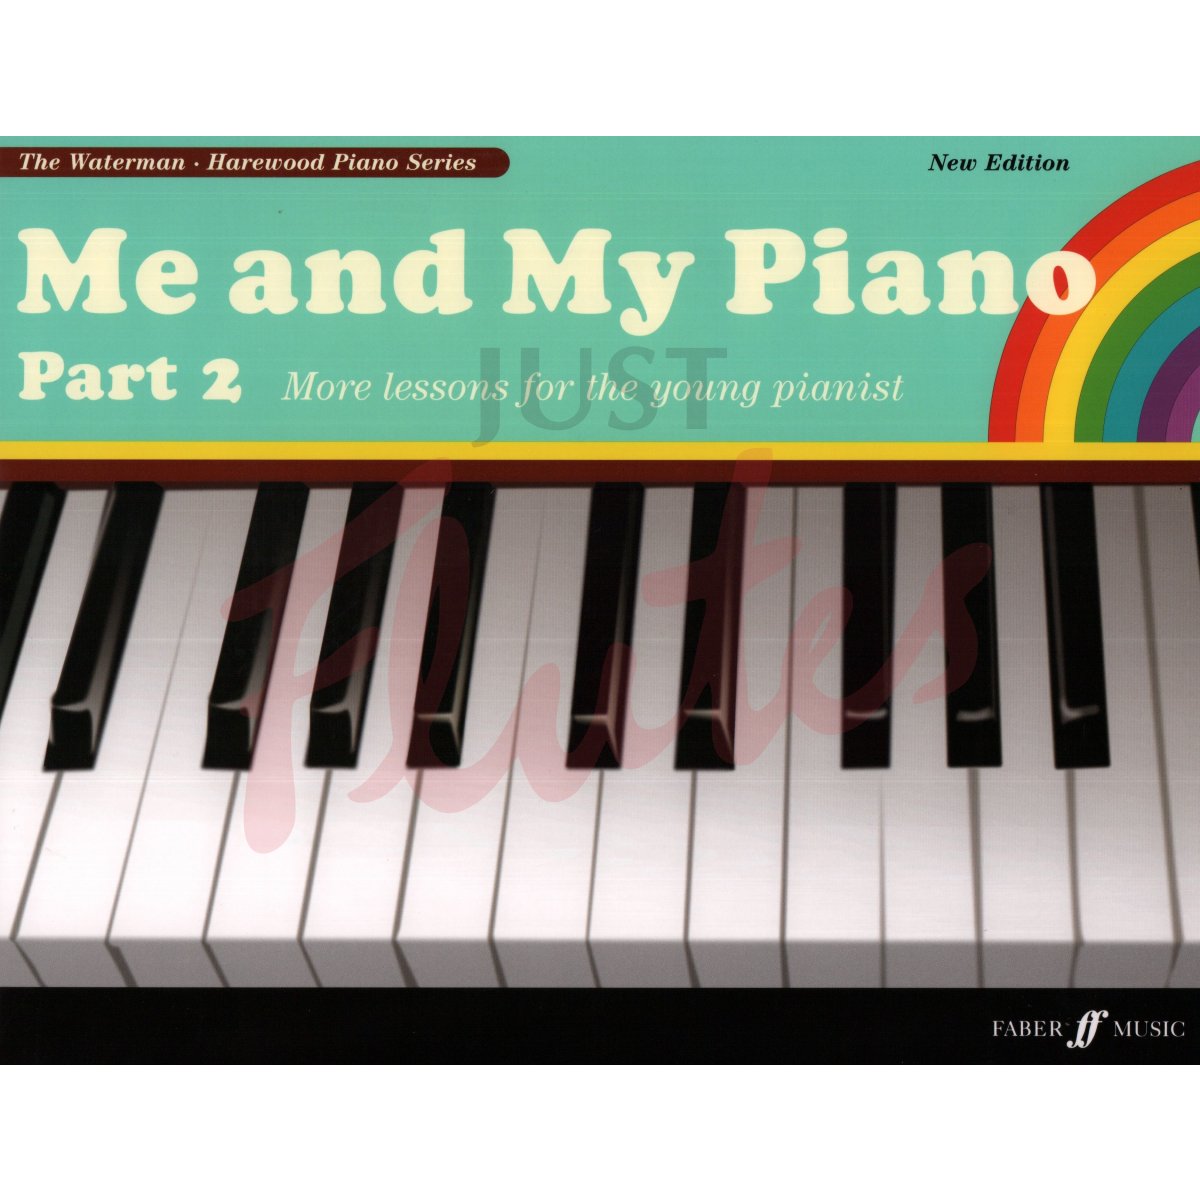 Me and My Piano Part 2